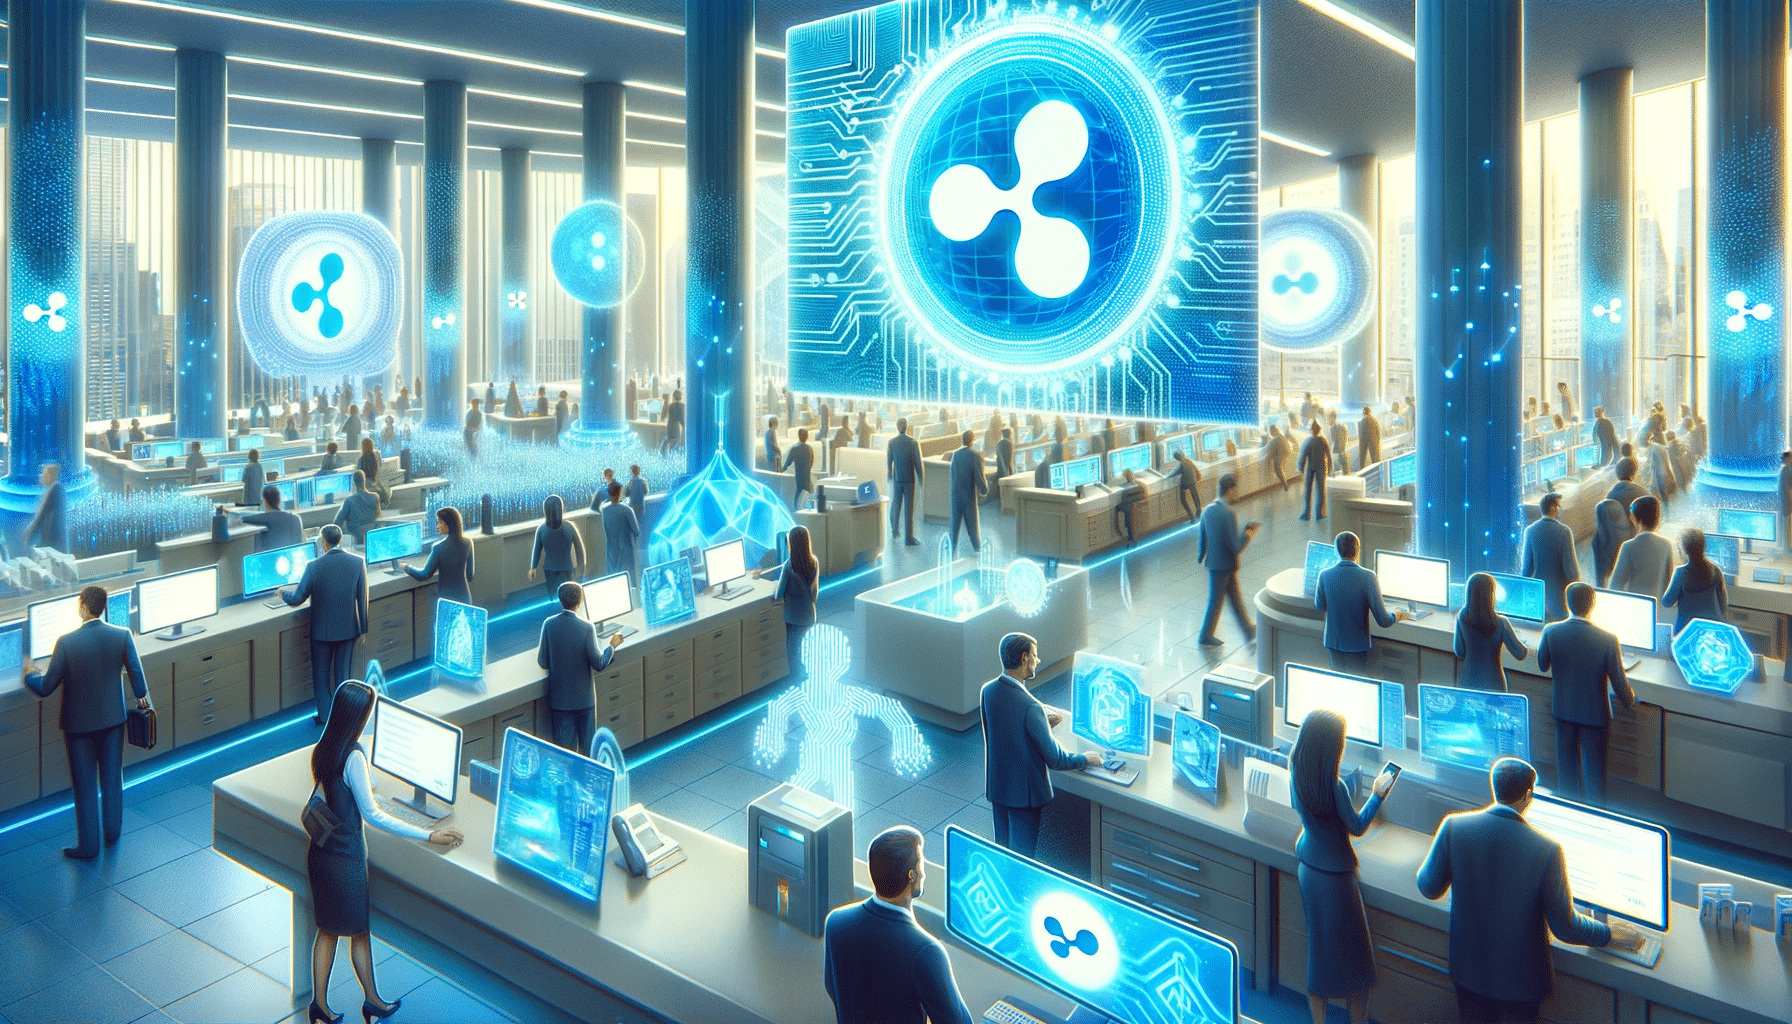 Ripple’s XRP Ledger Can Process 3,400 TPS, Facilitating Over 293 Million Transactions Daily